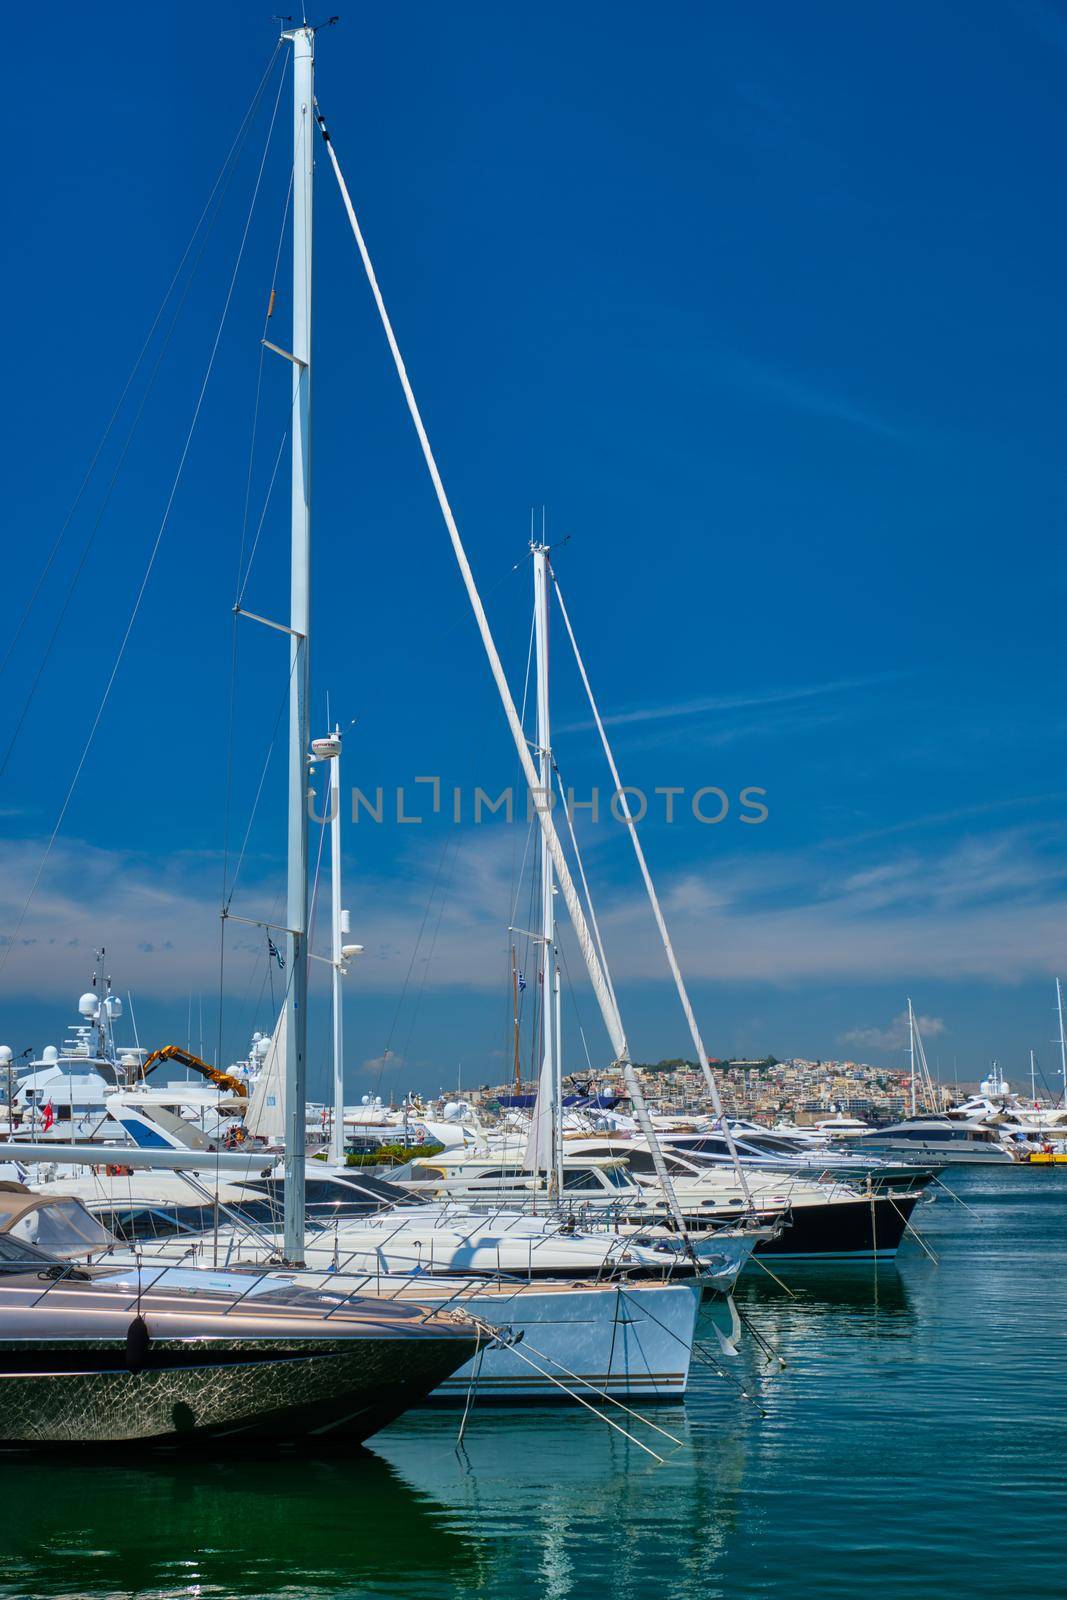 Yachts and boats in port of Athens. Athens, Greece by dimol